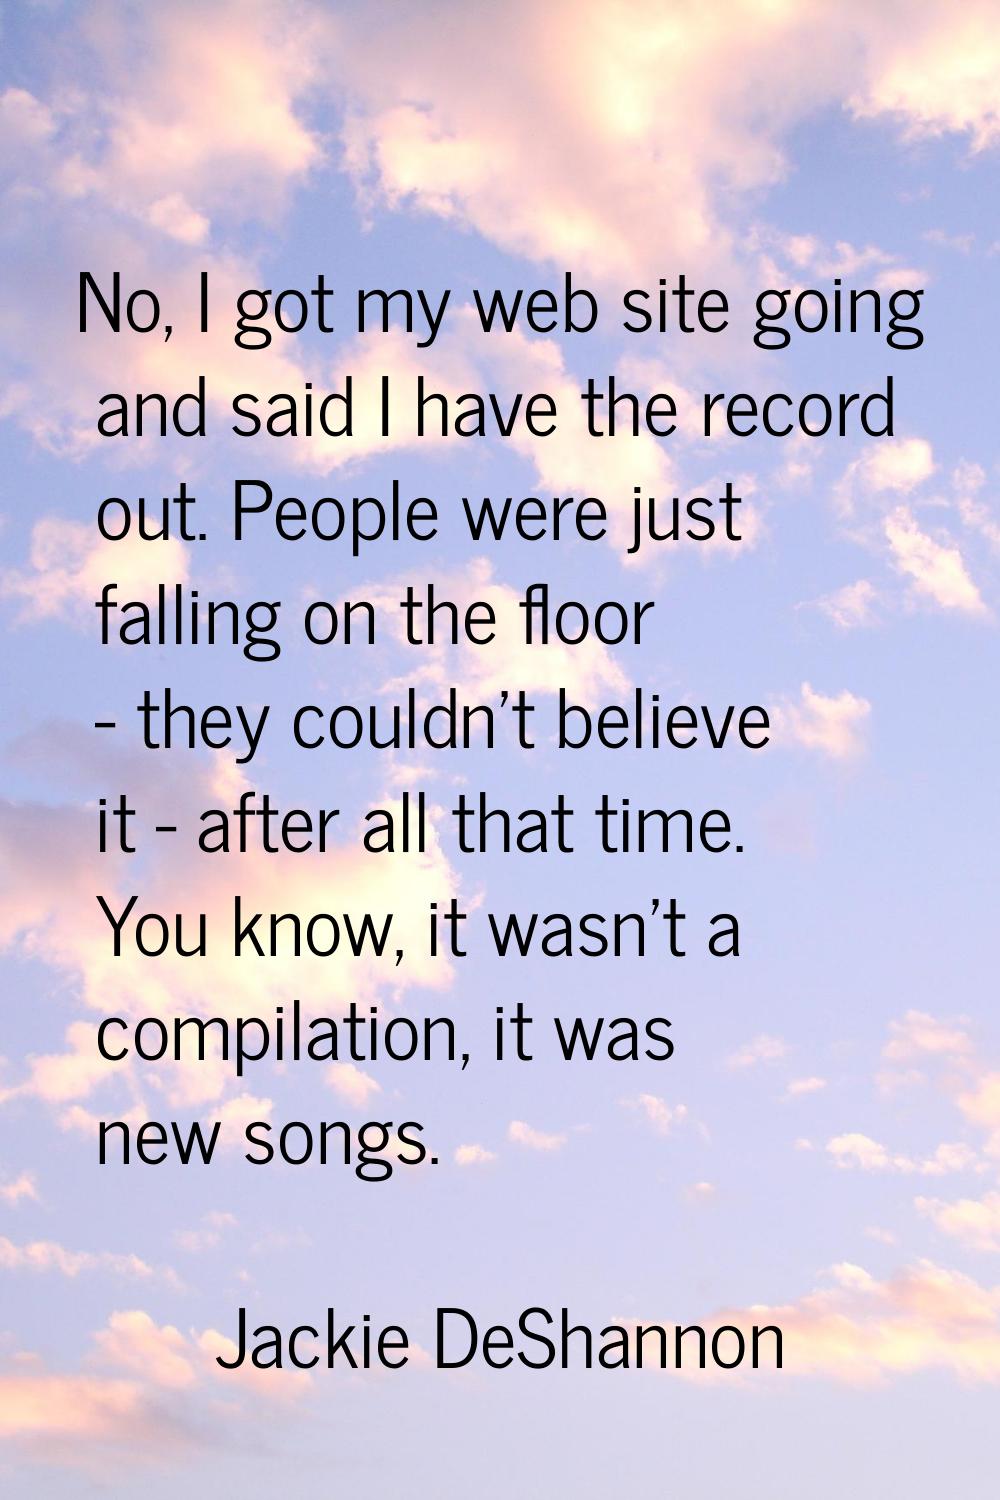 No, I got my web site going and said I have the record out. People were just falling on the floor -